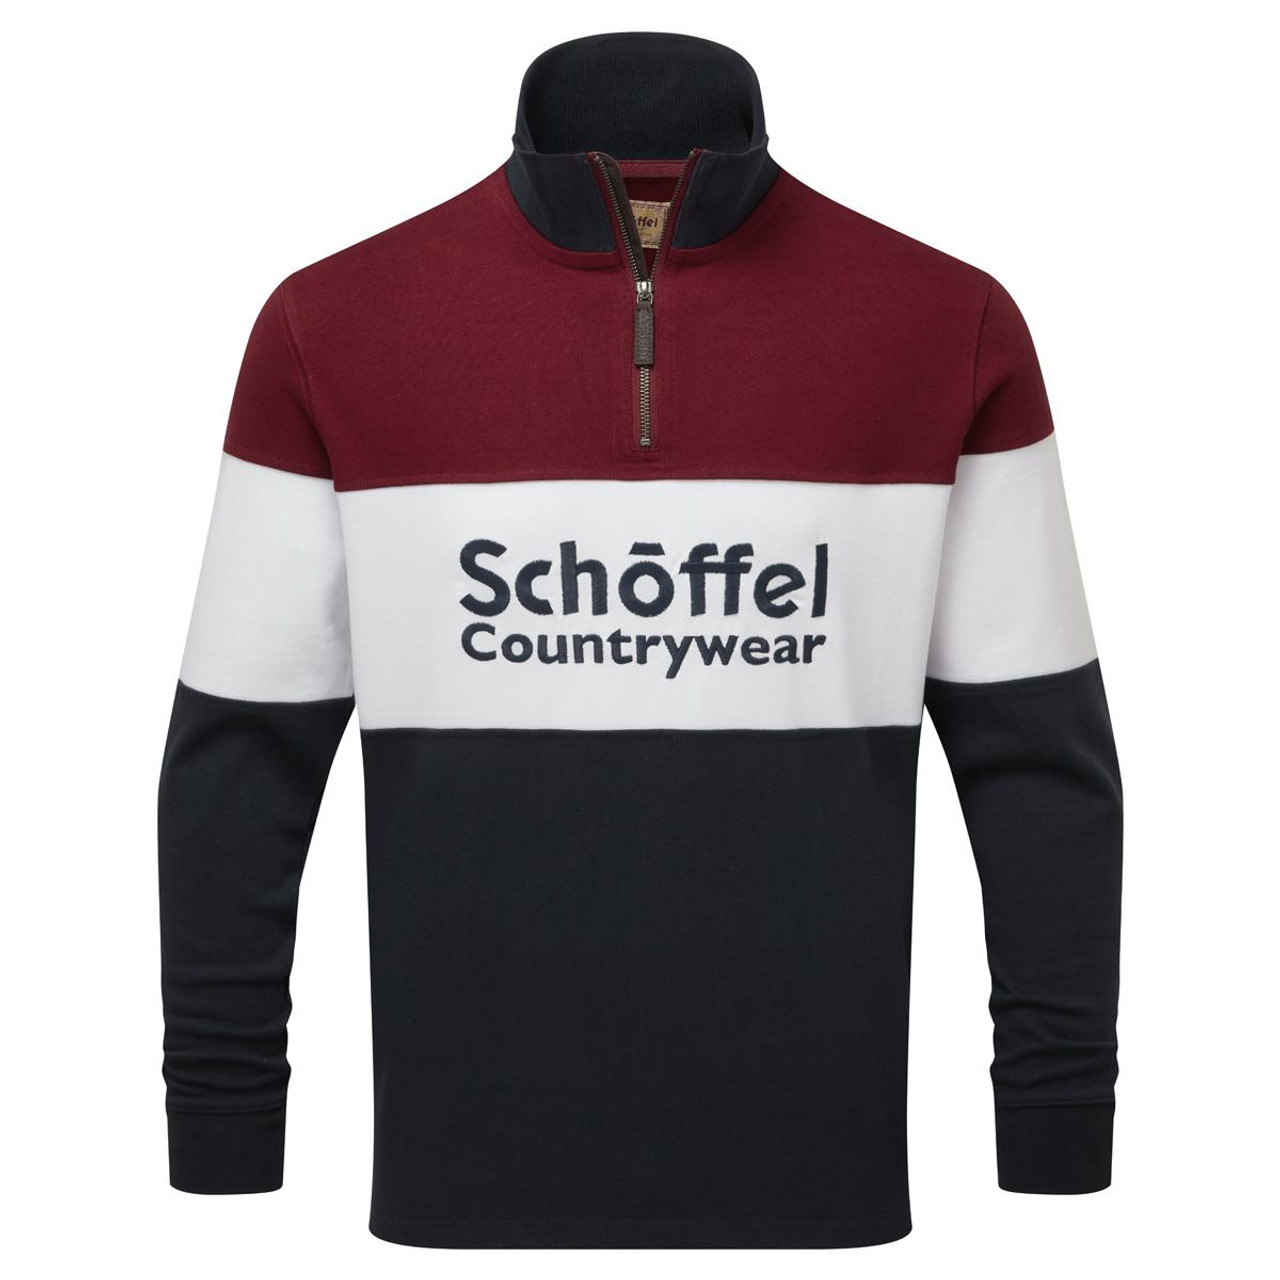 Is the Schoffel Exeter suitable for all occasions with the Schoffel Exeter Heritage 1/4 Zip Unisex?